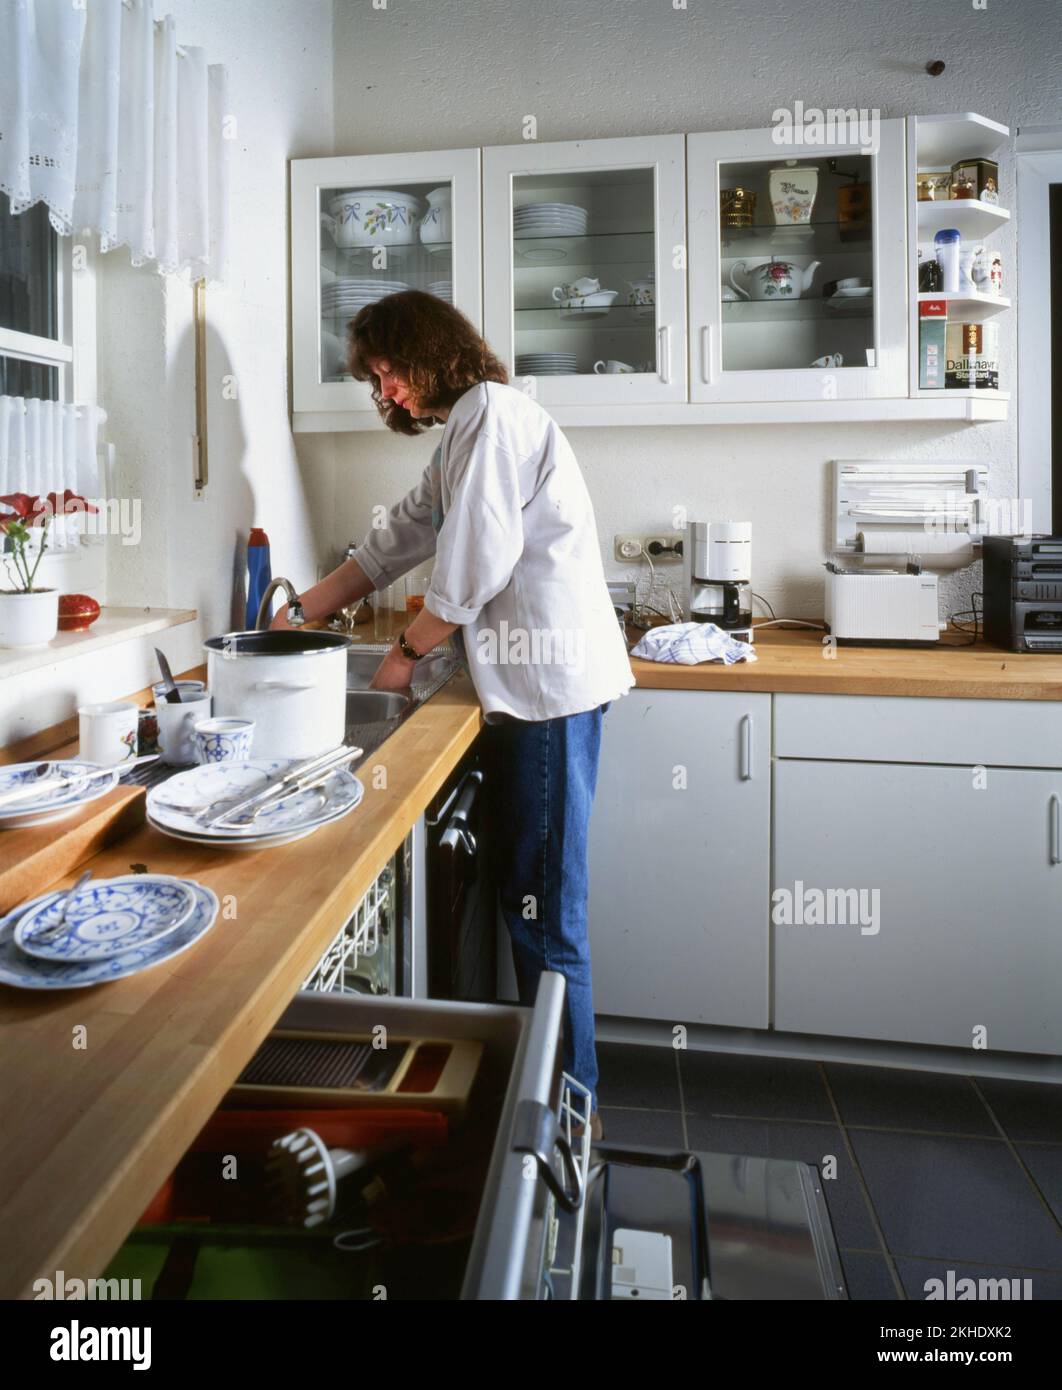 The housework of a housewife, here on 01.02.1995 in Iserlohn, is also a demanding occupation at any time, Germany, Europe Stock Photo